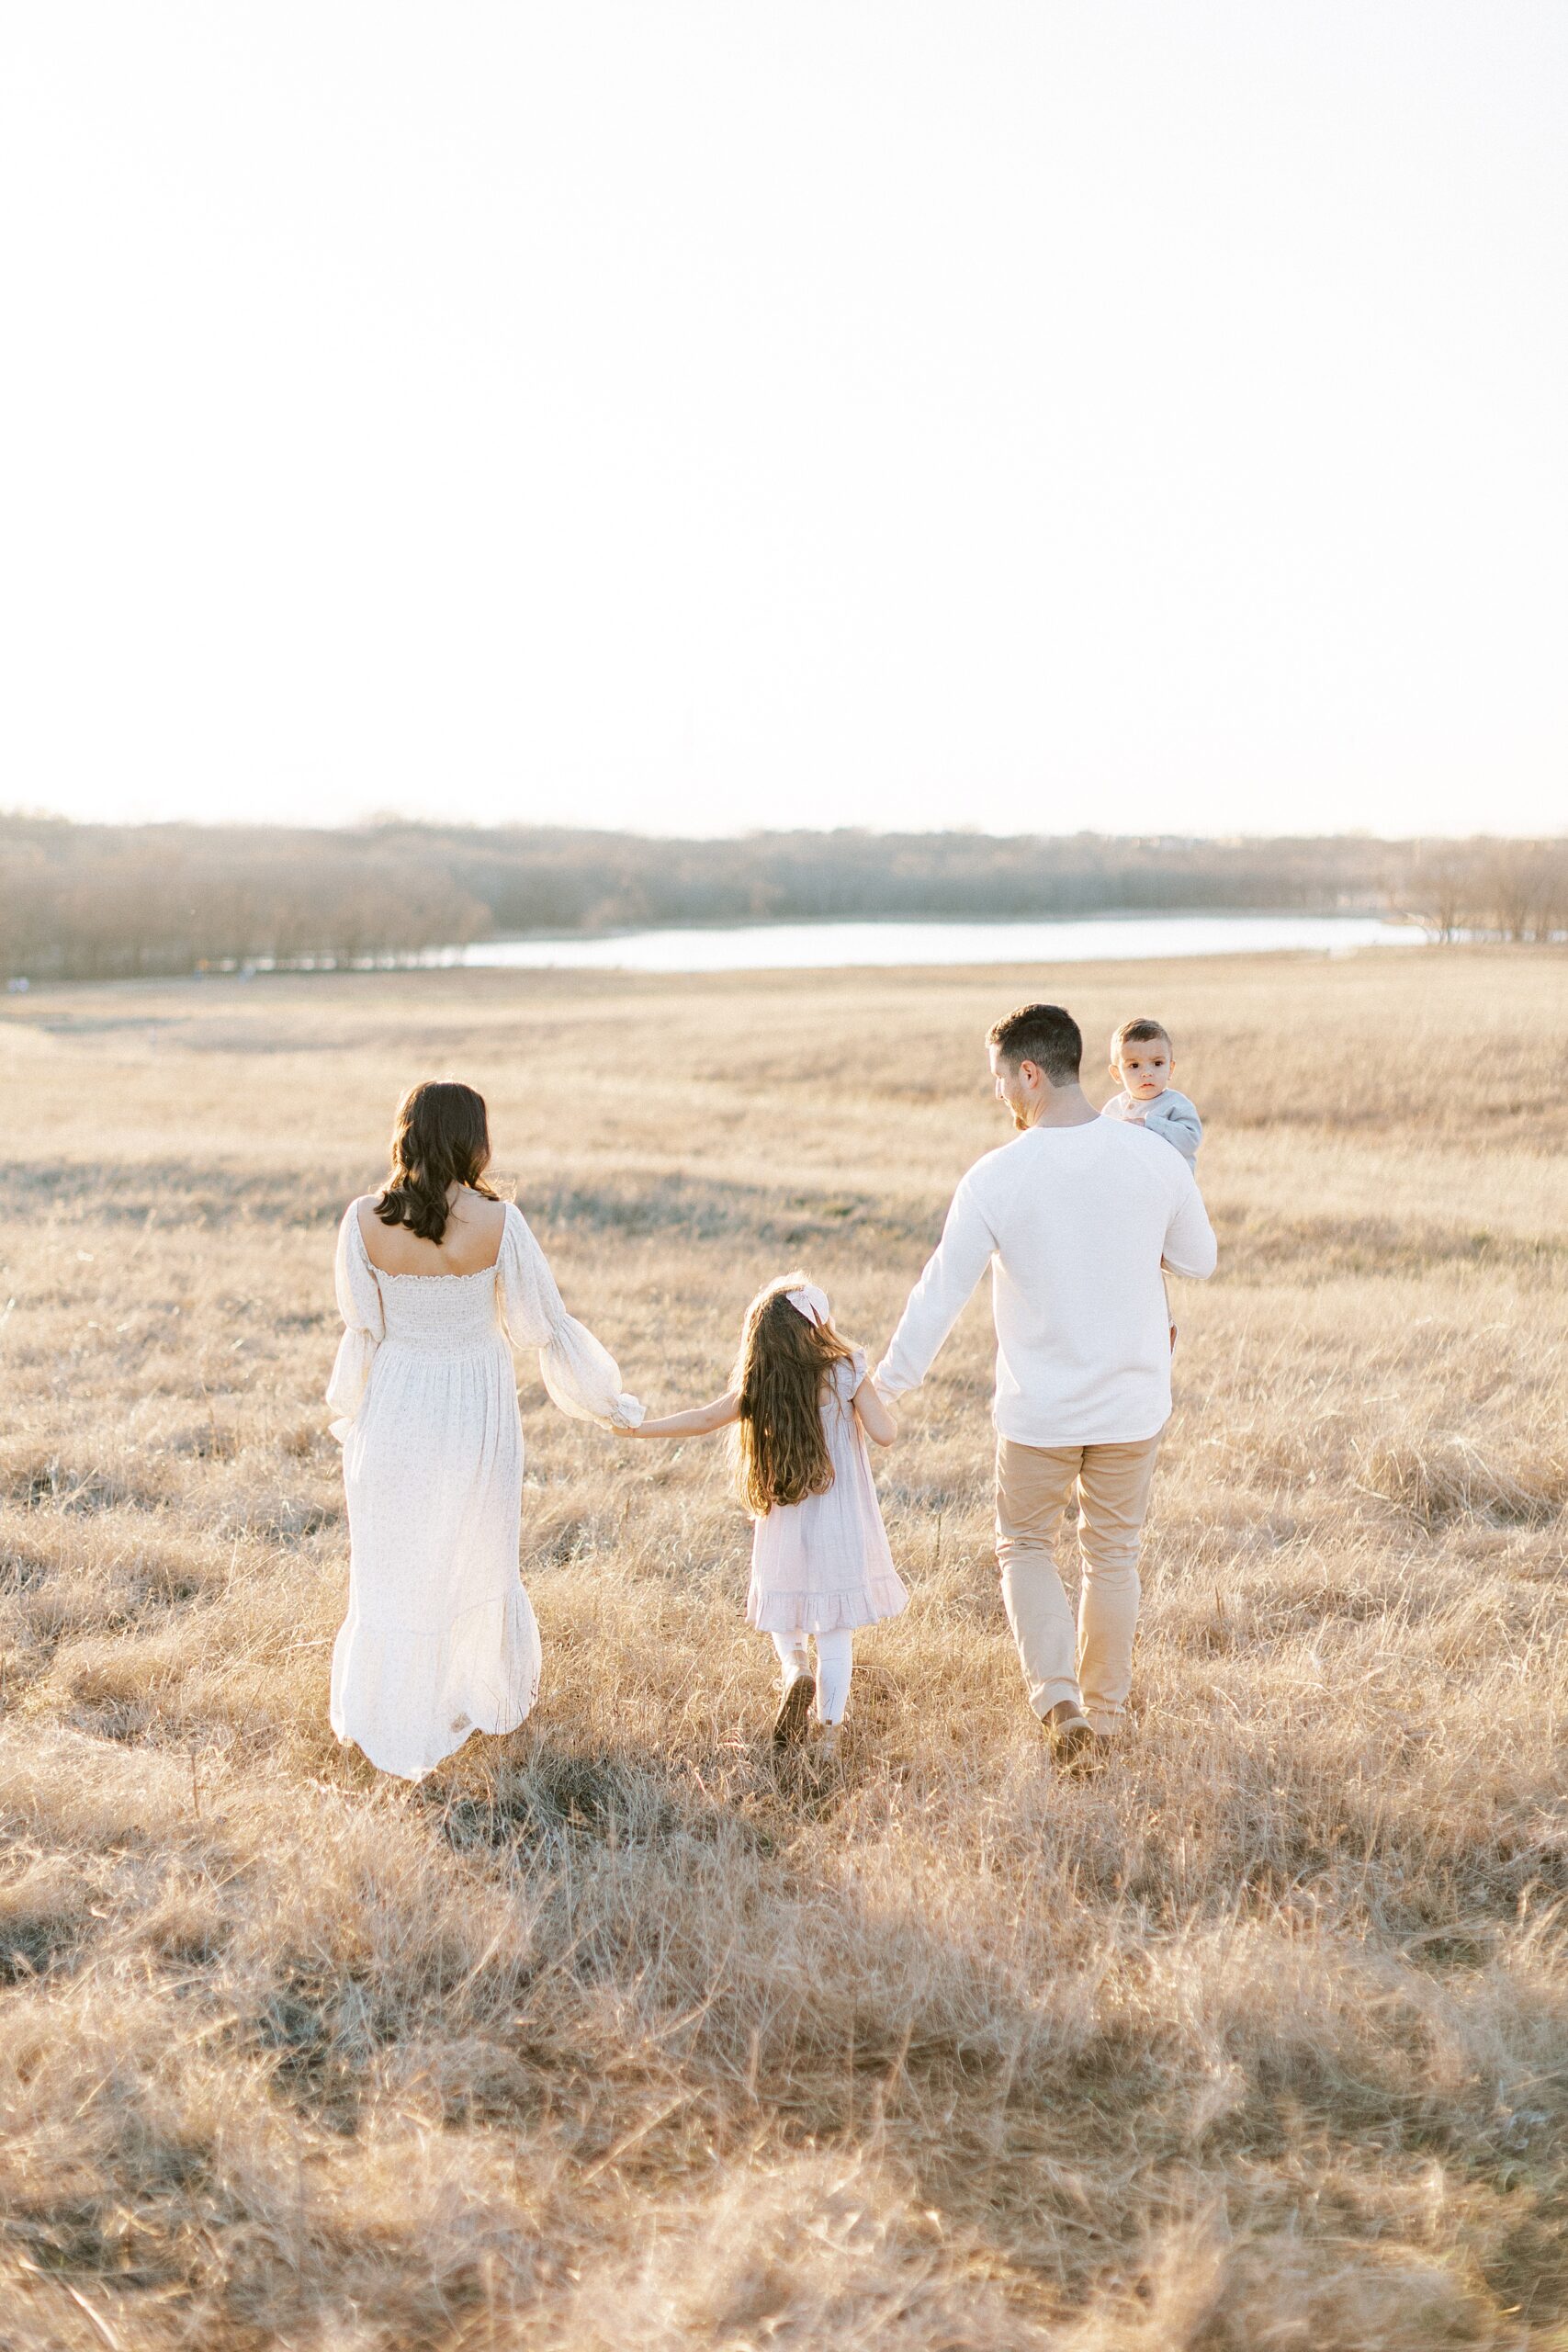 A mom and dad walk through a large field to a lake holding hands with their toddler daughter and holding their toddler son after visiting Dallas Pediatricians